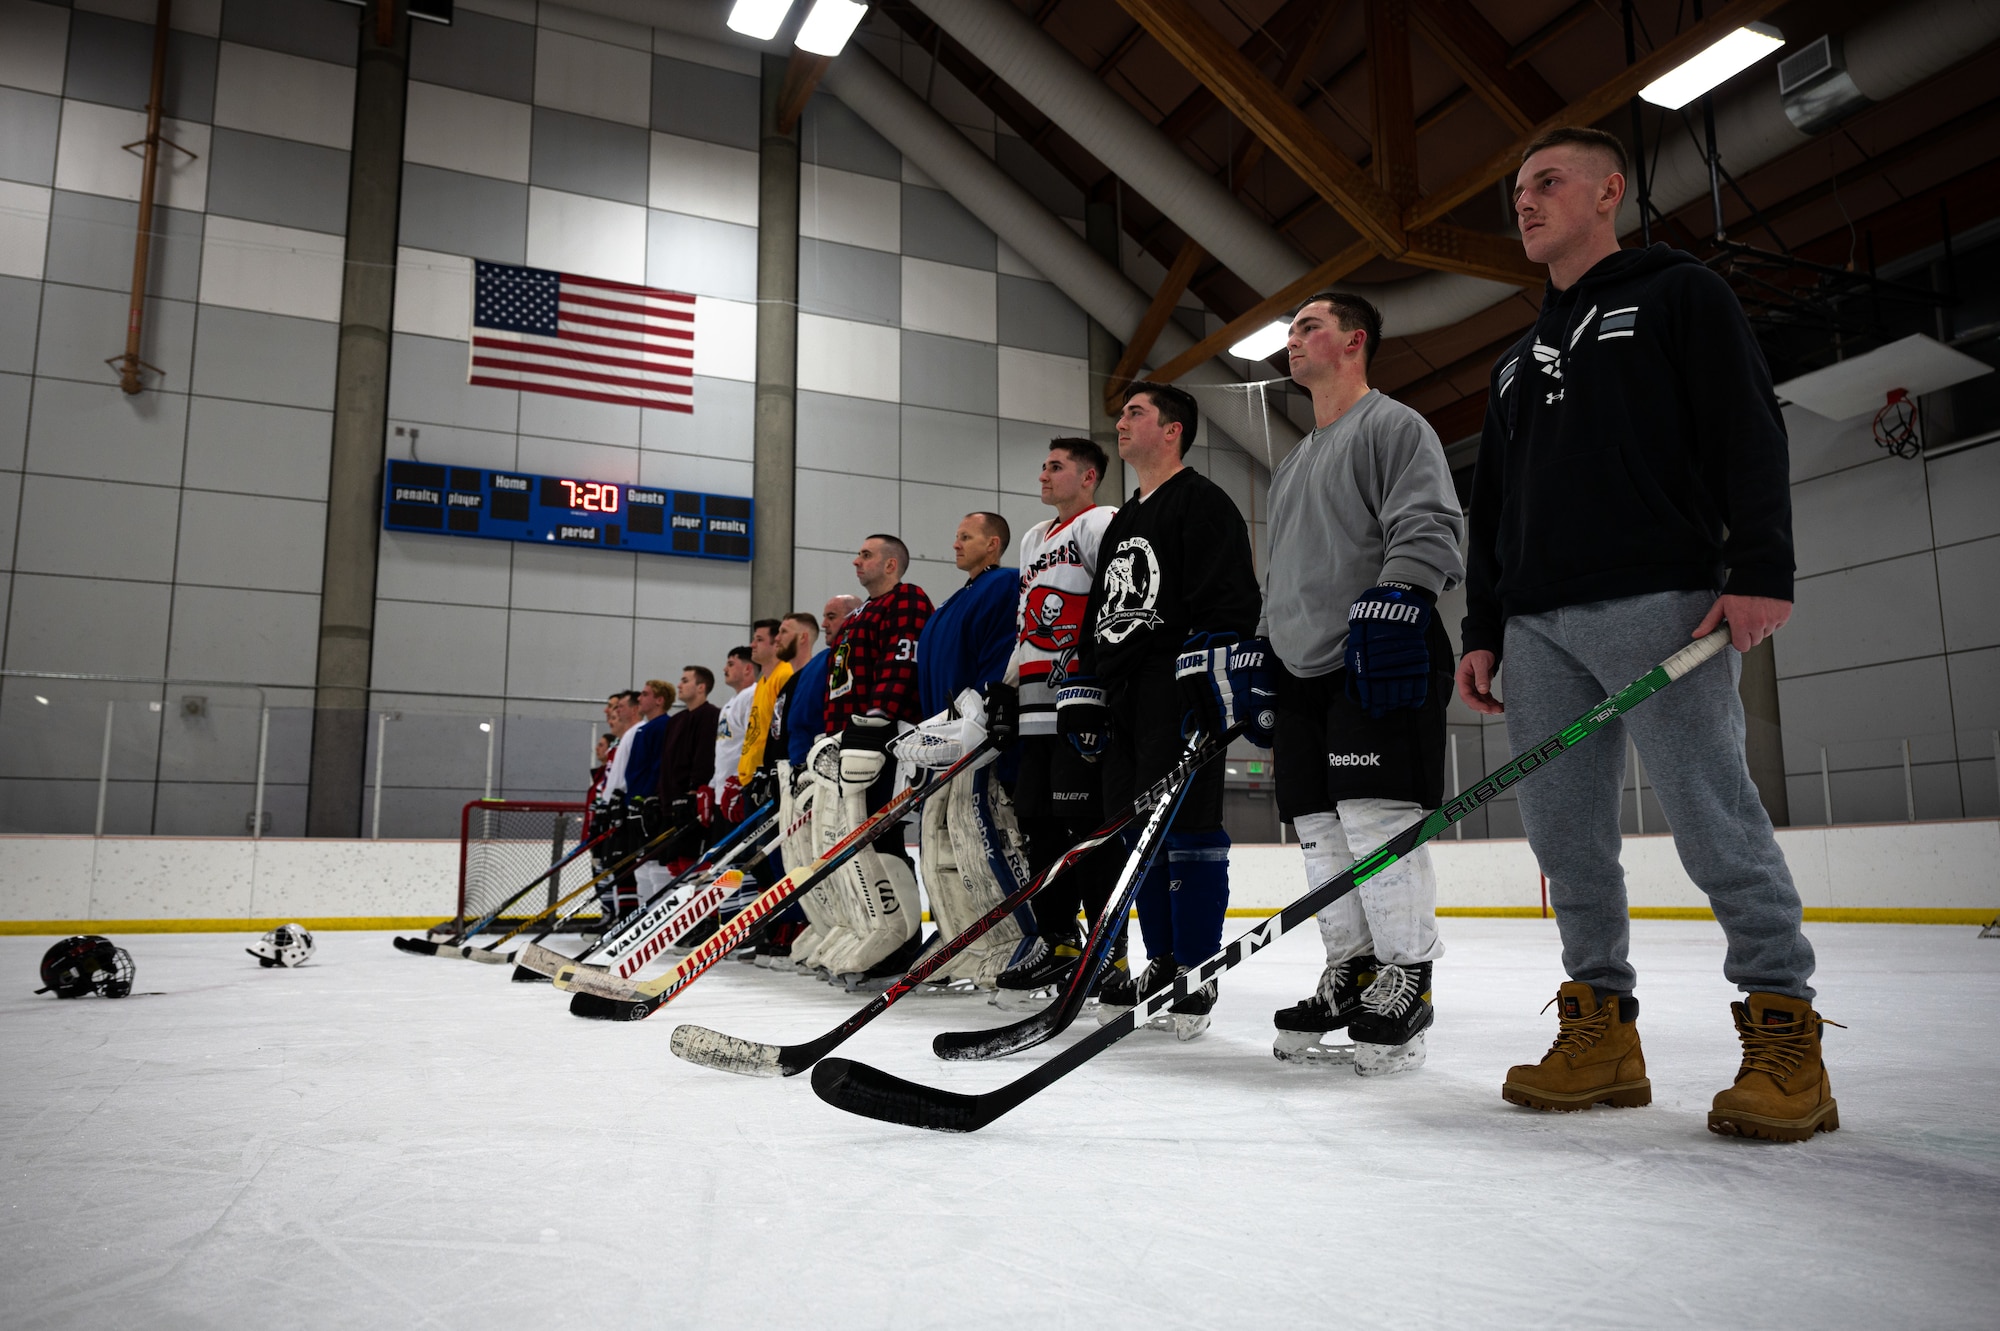 Members of the Eielson Hockey Team pose for a group photo on Fort Wainwright, Alaska, Feb. 2, 2022.